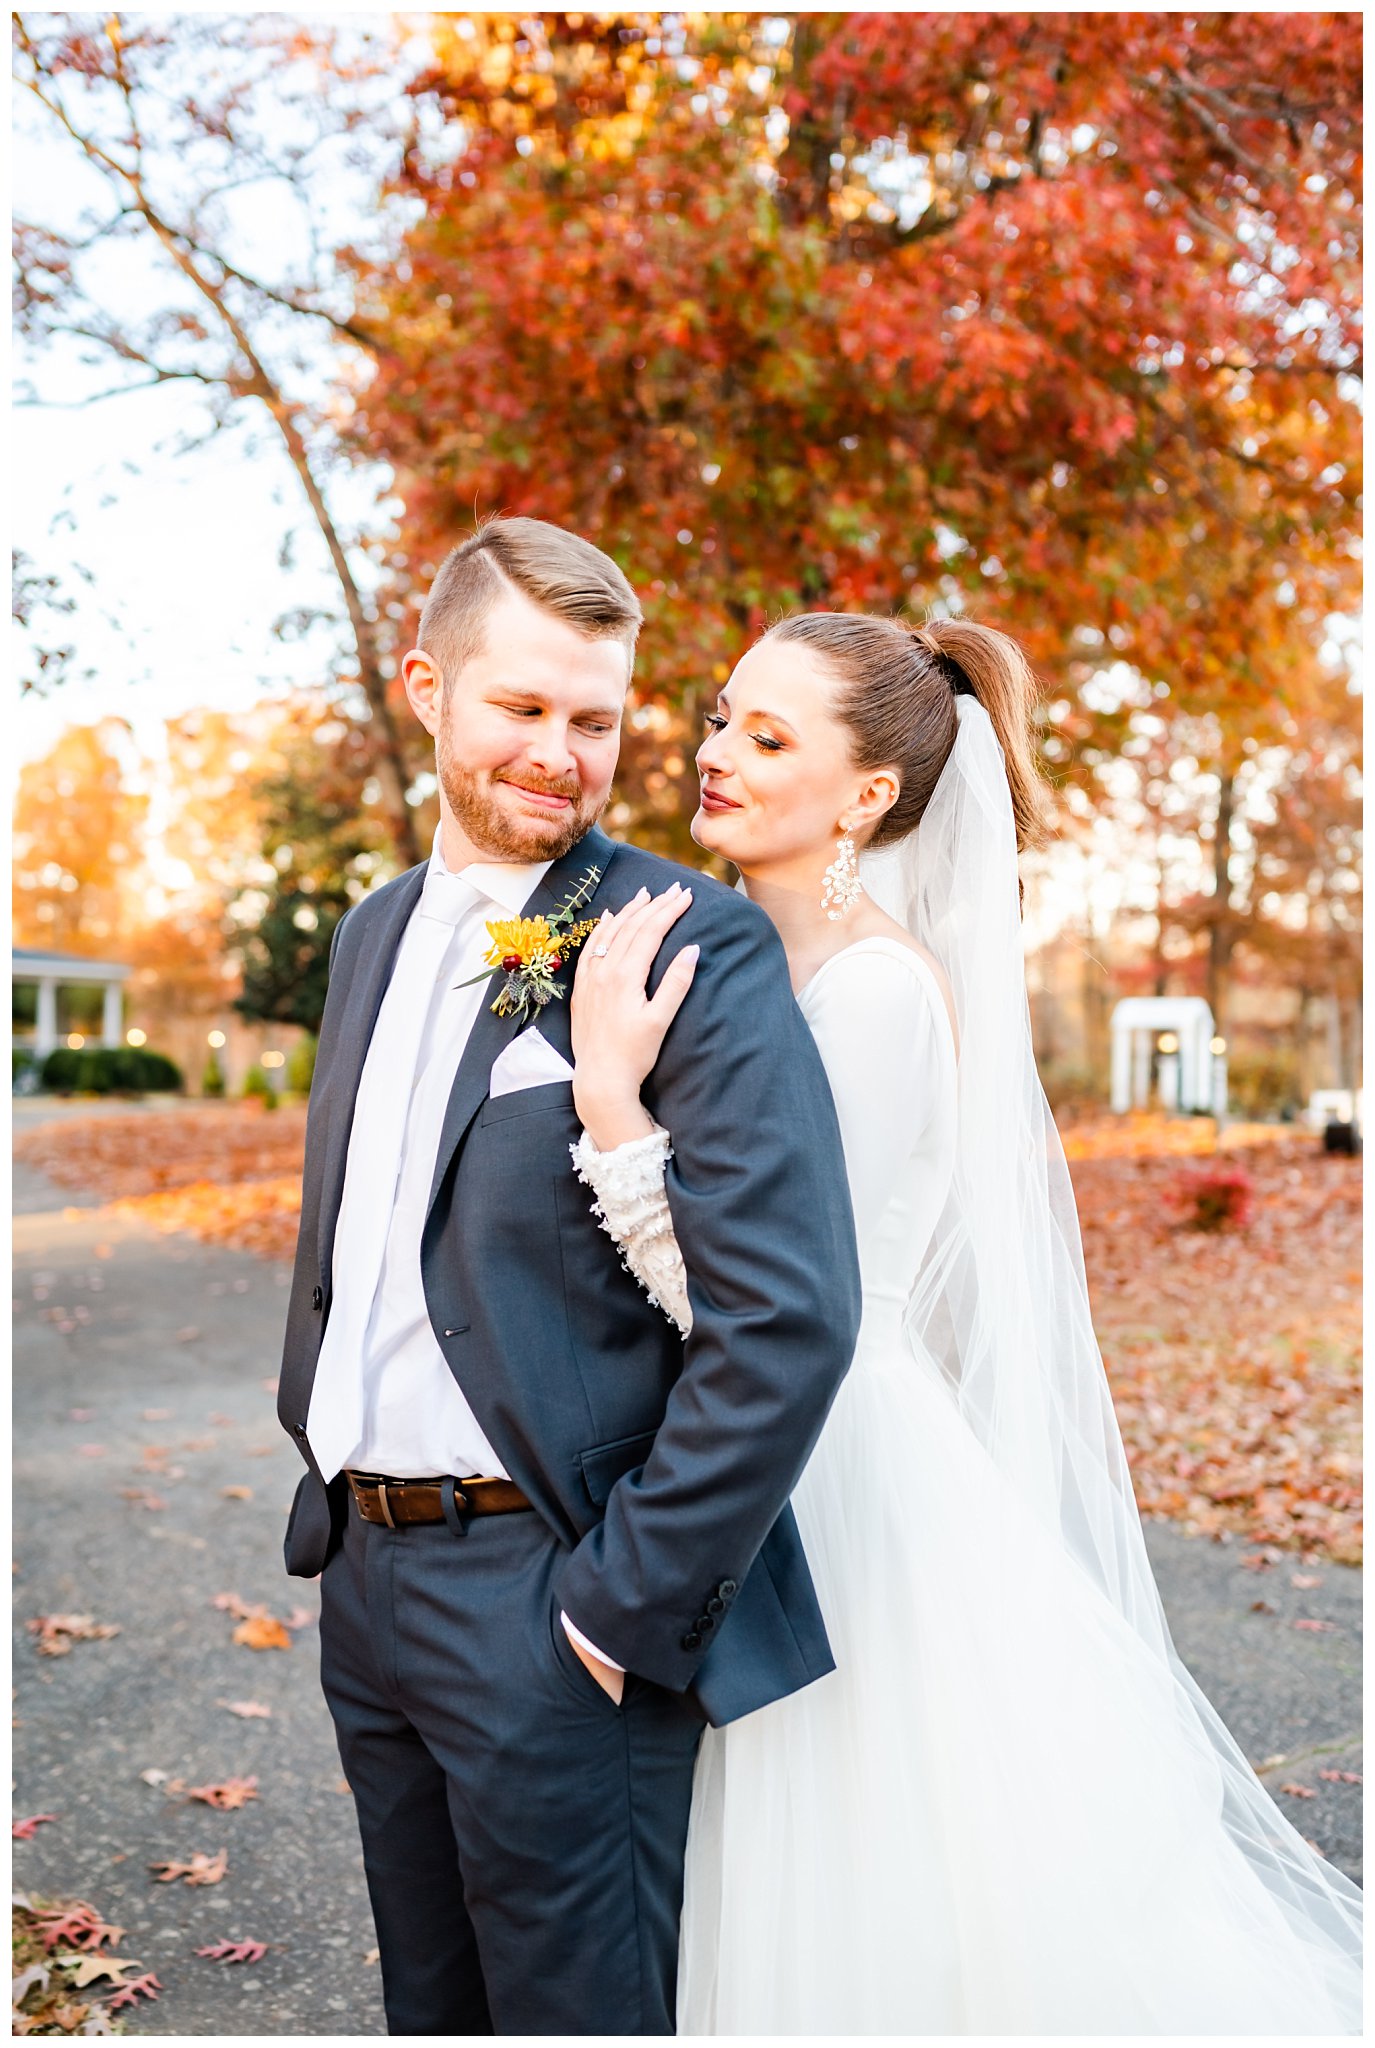 fall leaves bride and groom